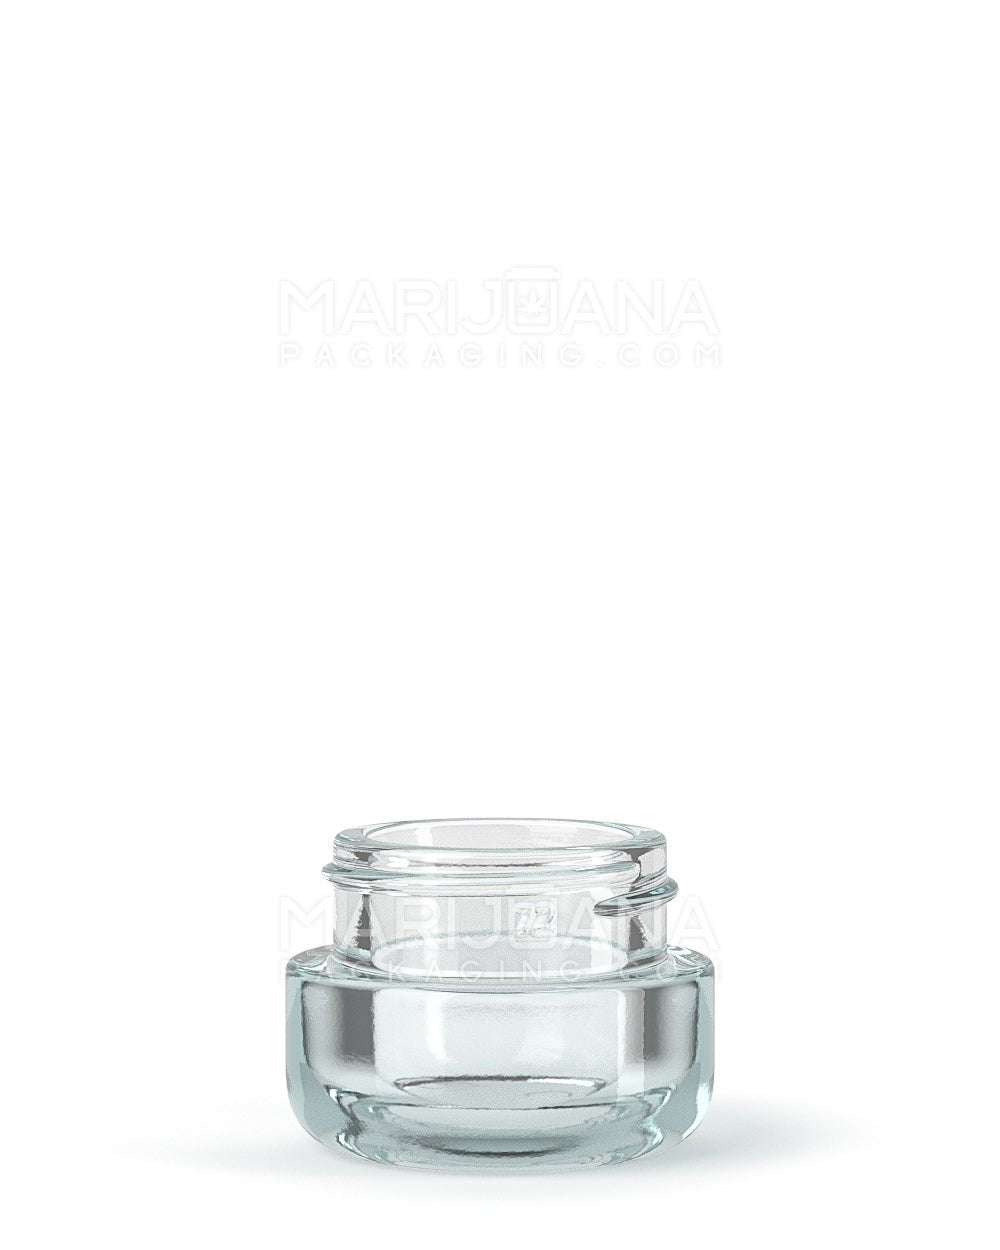 POLLEN GEAR | HiLine Glossy Clear Glass Concentrate Containers | 29mm - 5mL - 308 Count - 1